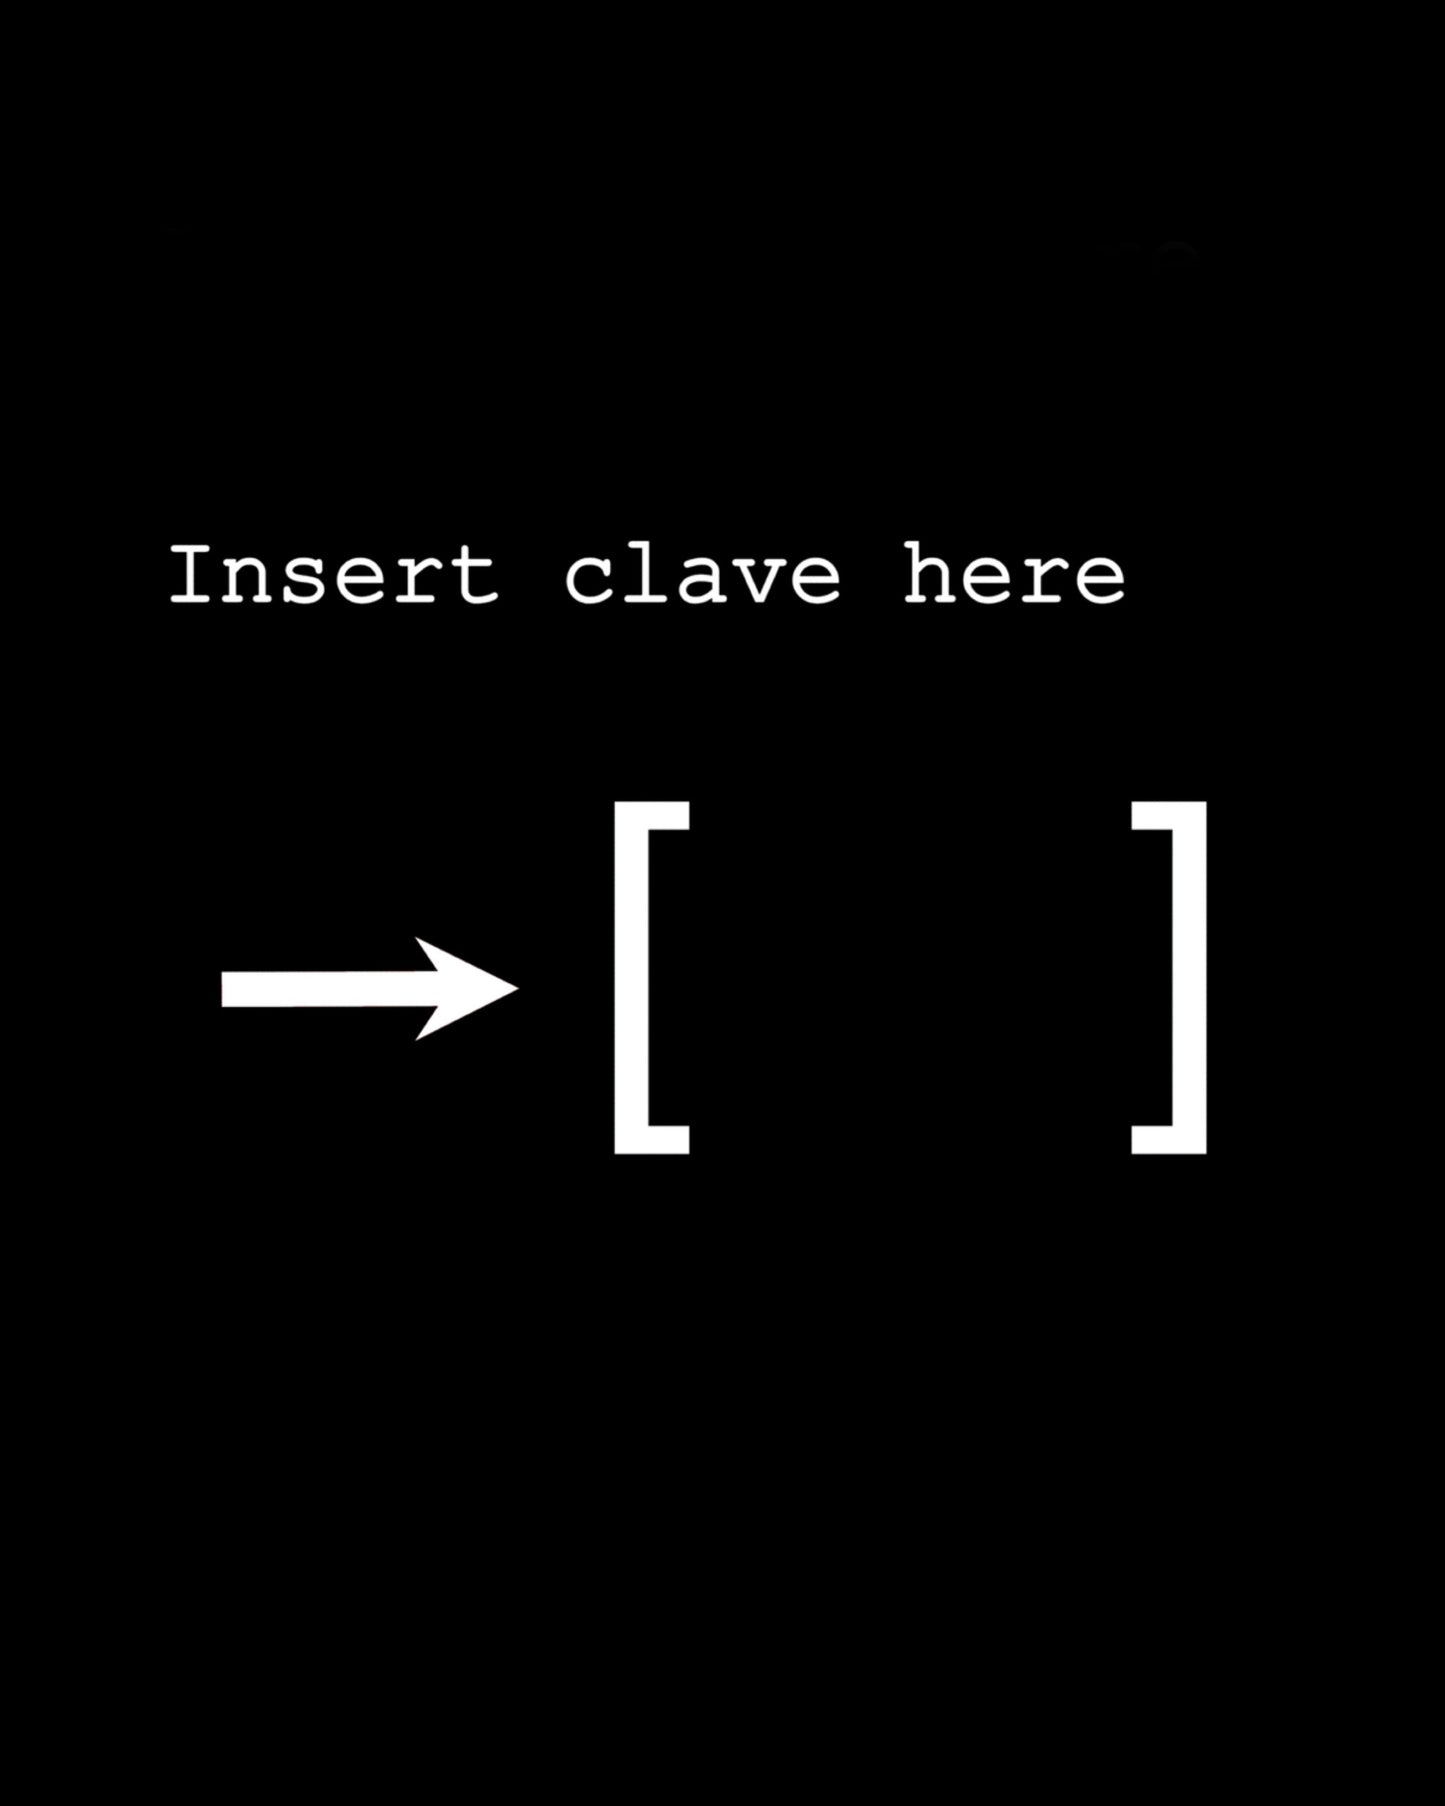 Insert clave here